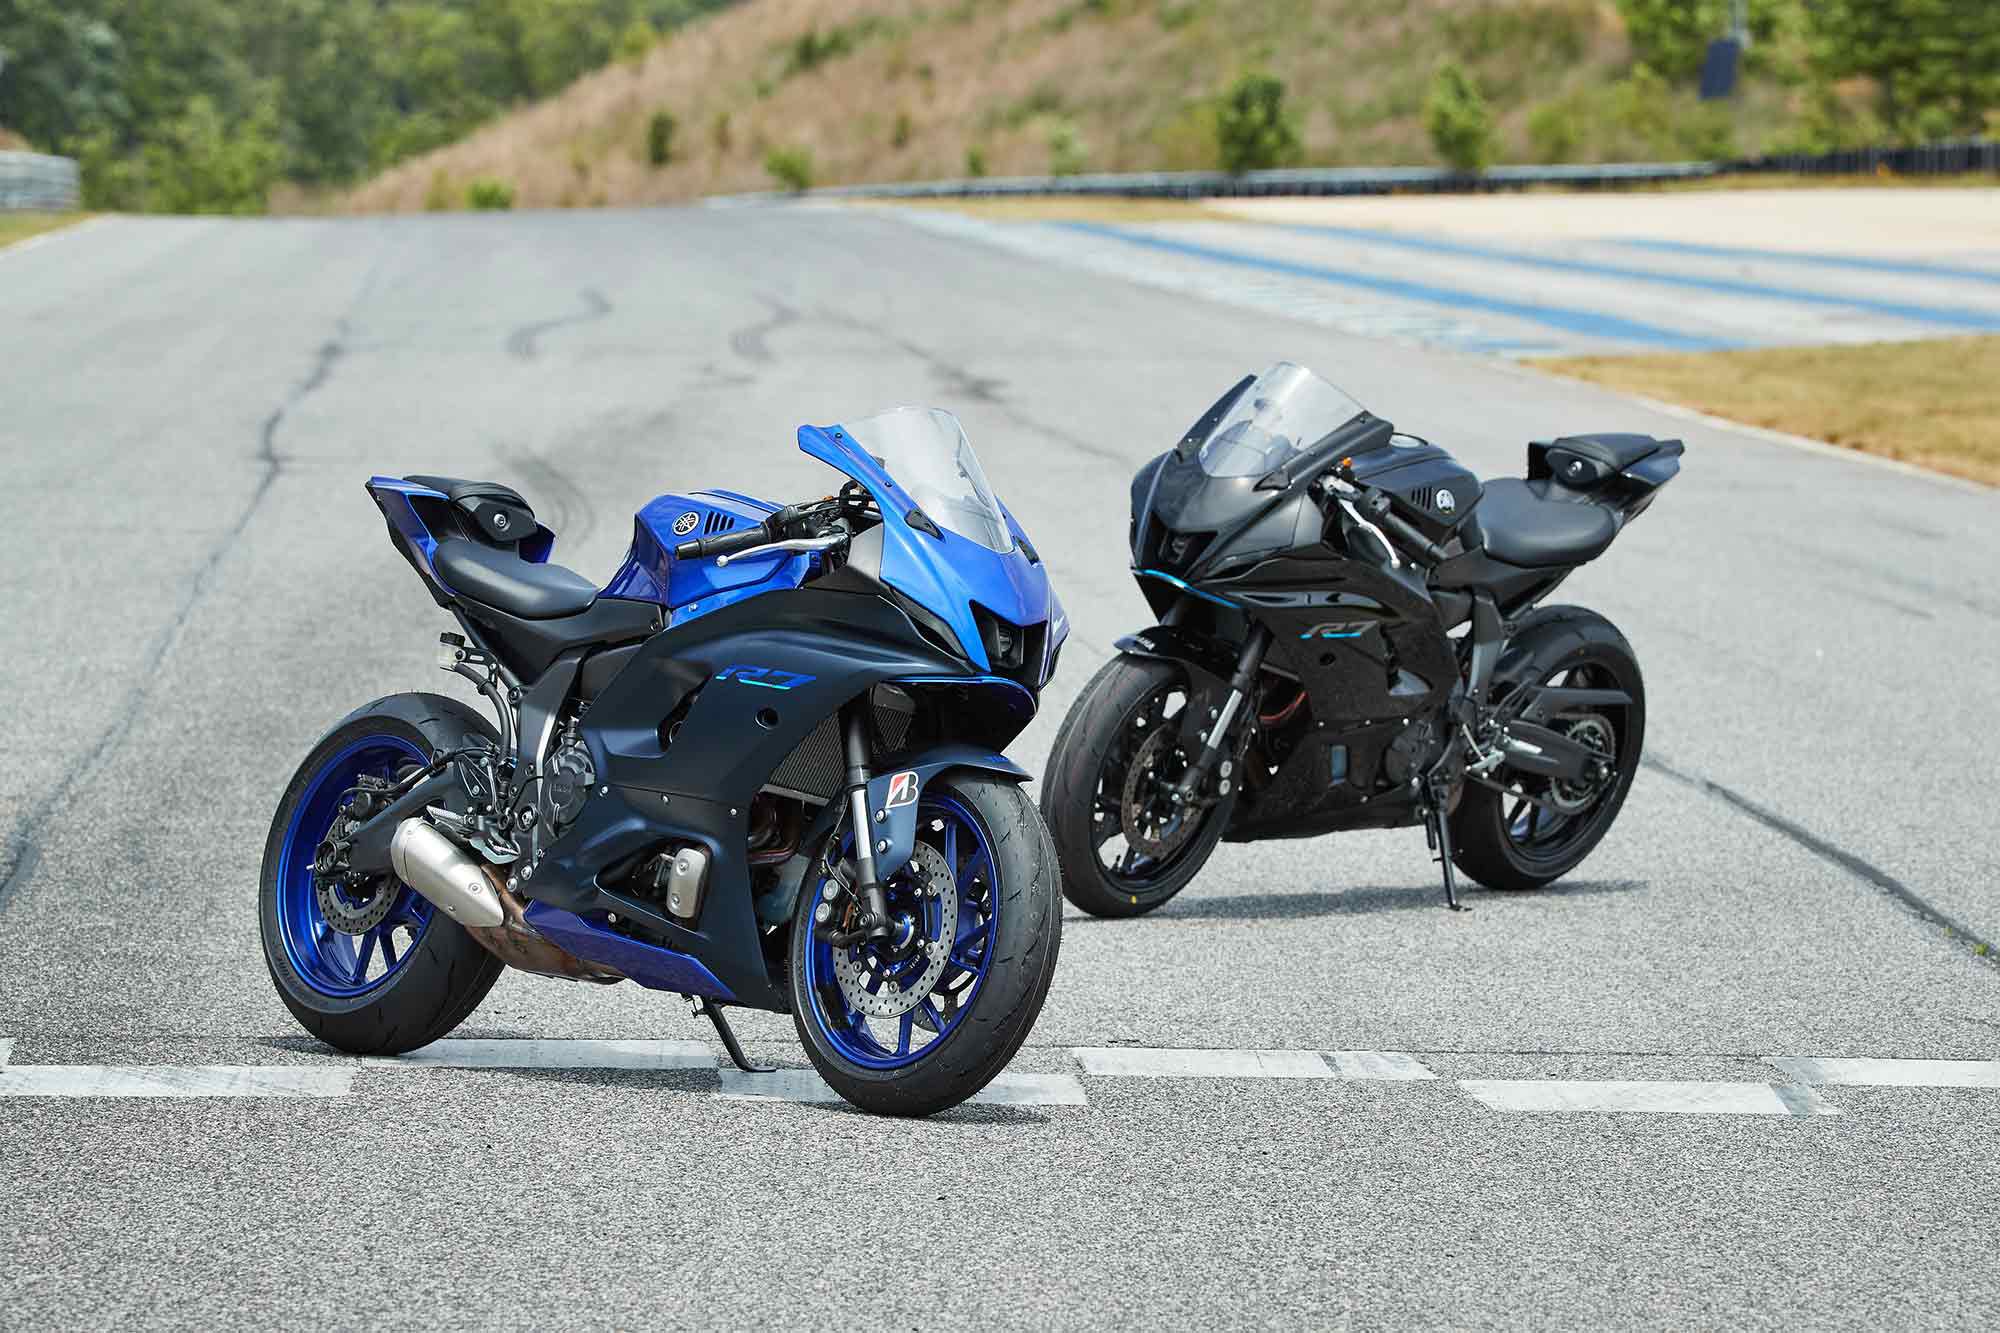 The ’22 YZF-R7 benefits from authentic R-bike styling. Underneath the bodywork is a more forgiving twin-cylinder powertrain and chassis.